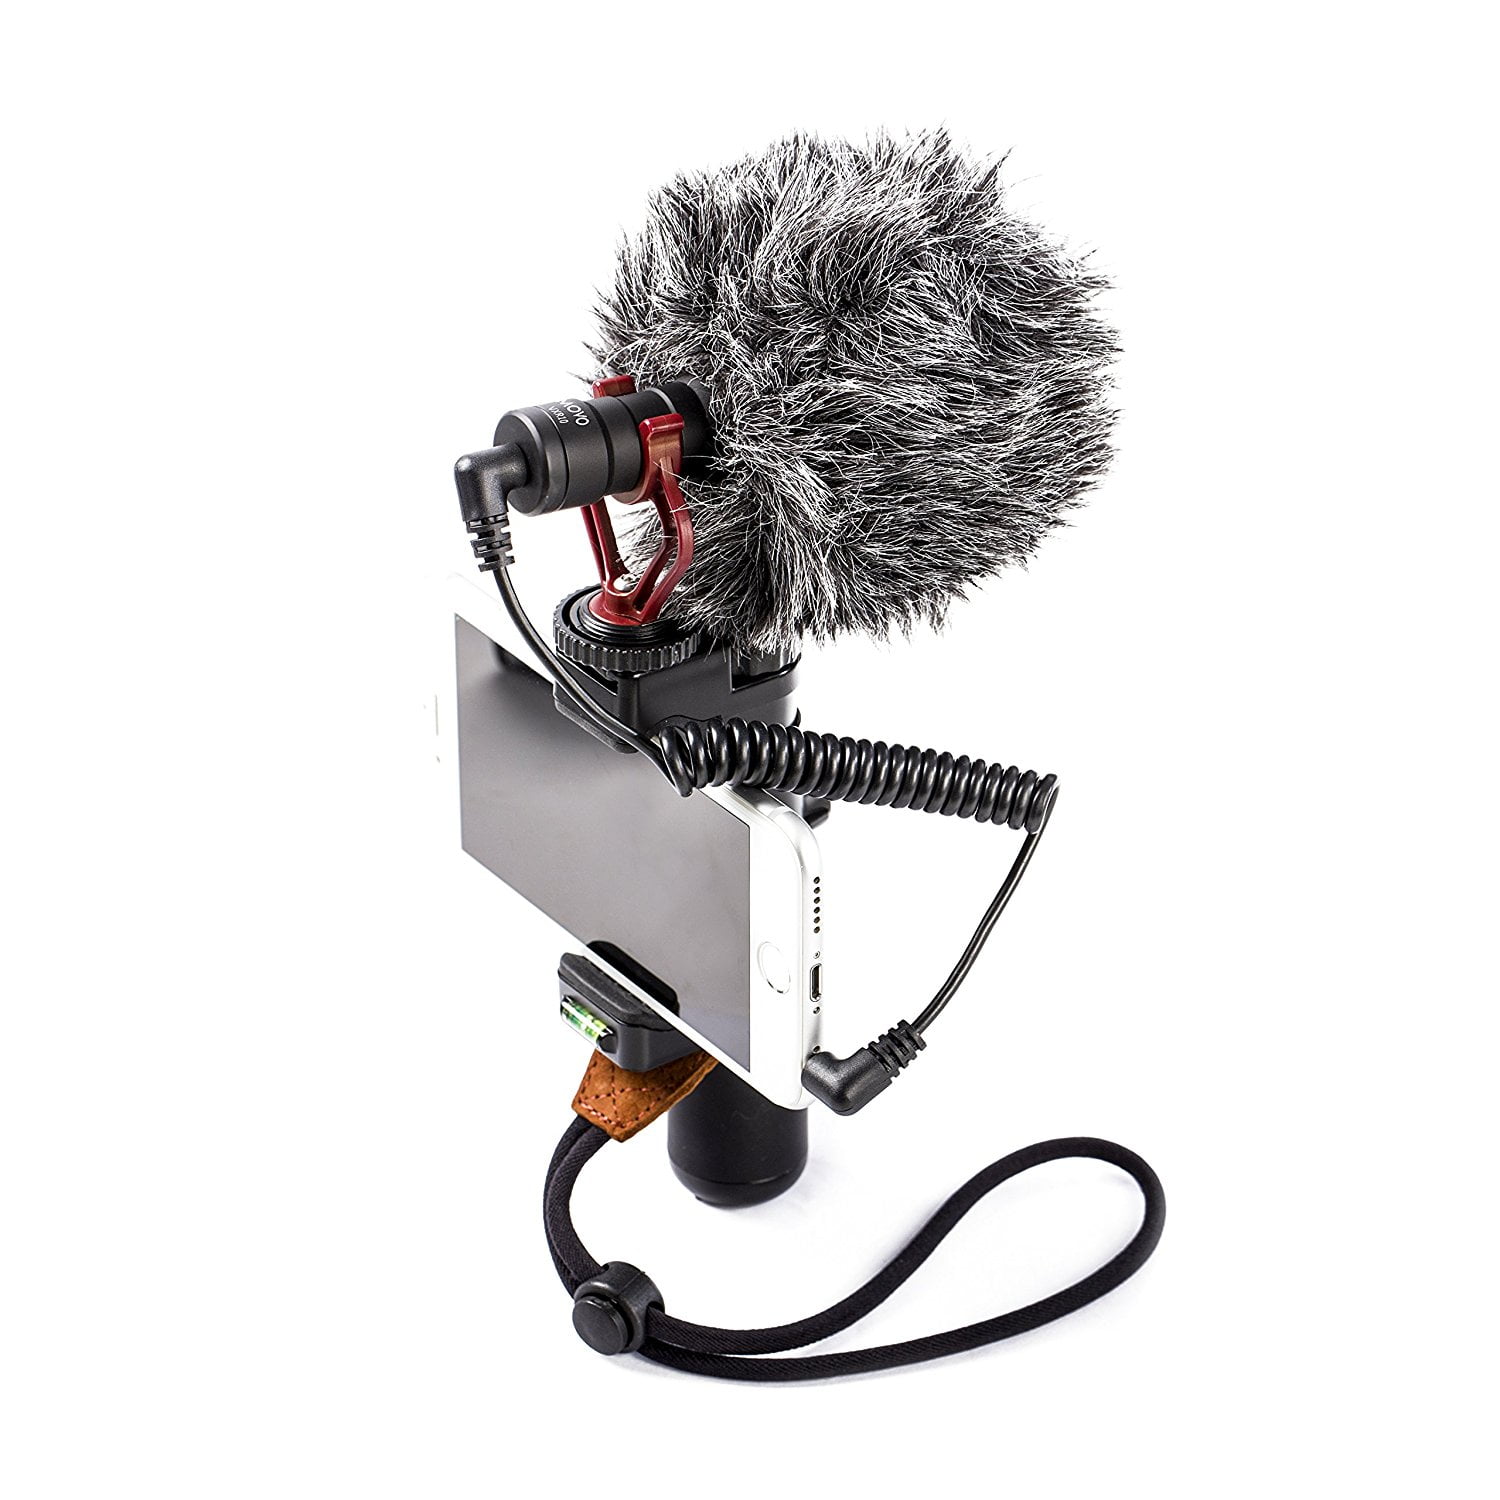 Movo Vxr10 Universal Video Microphone With Shock Mount Deadcat